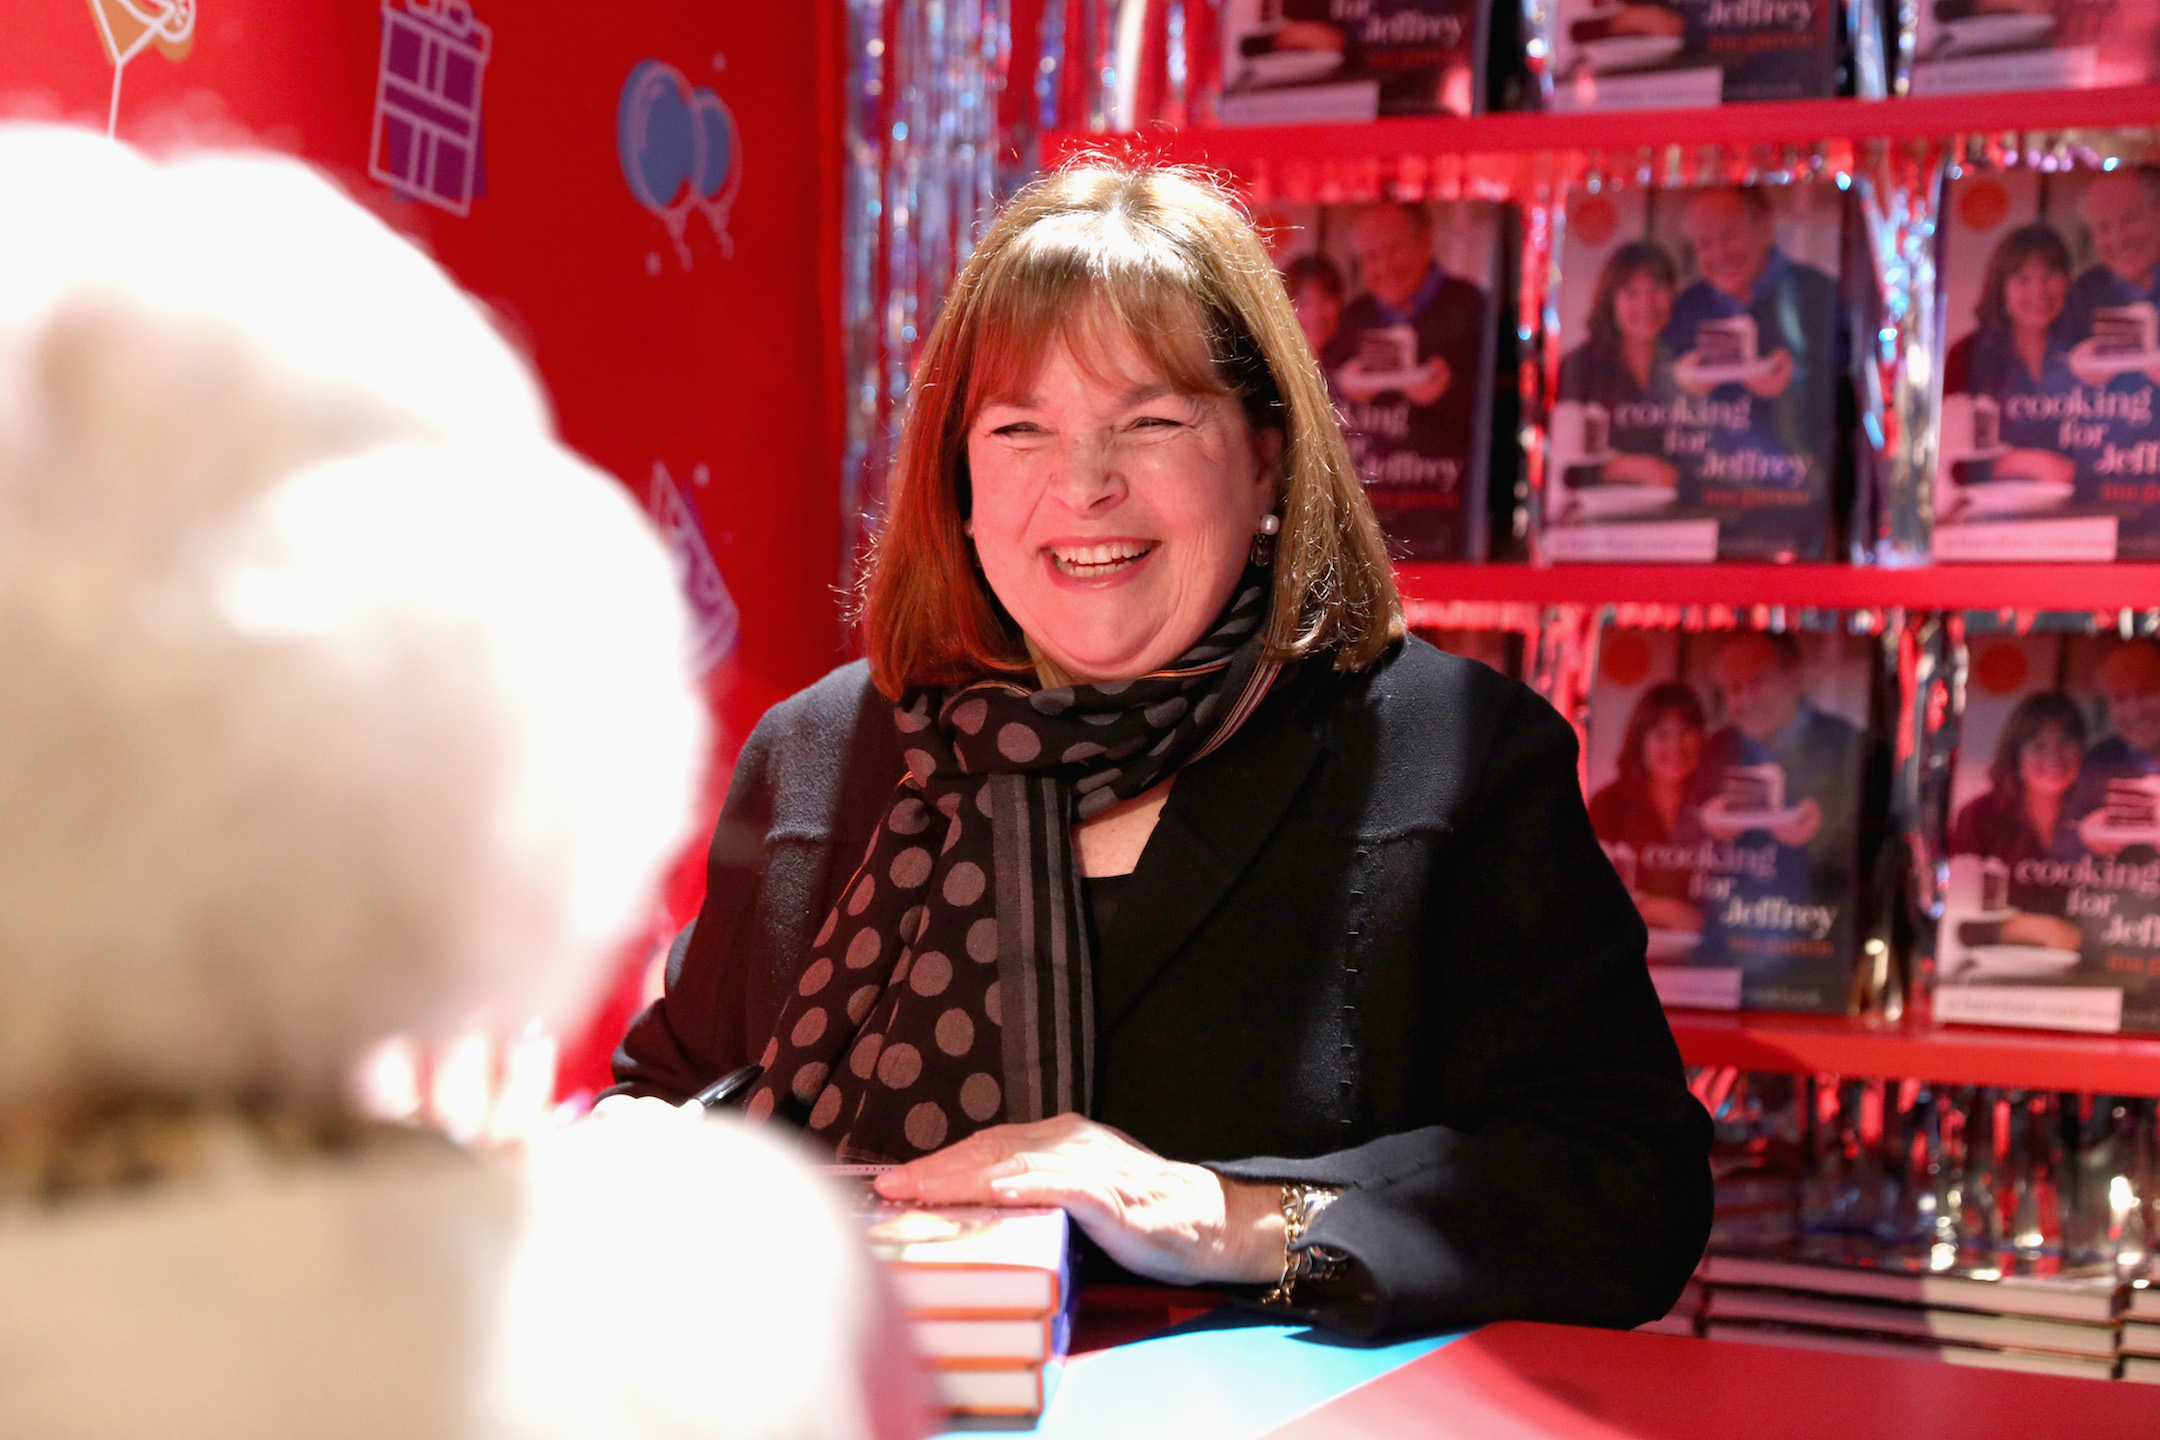 Ina Garten signs cookbooks during Food Network's 25th Birthday Party Celebration